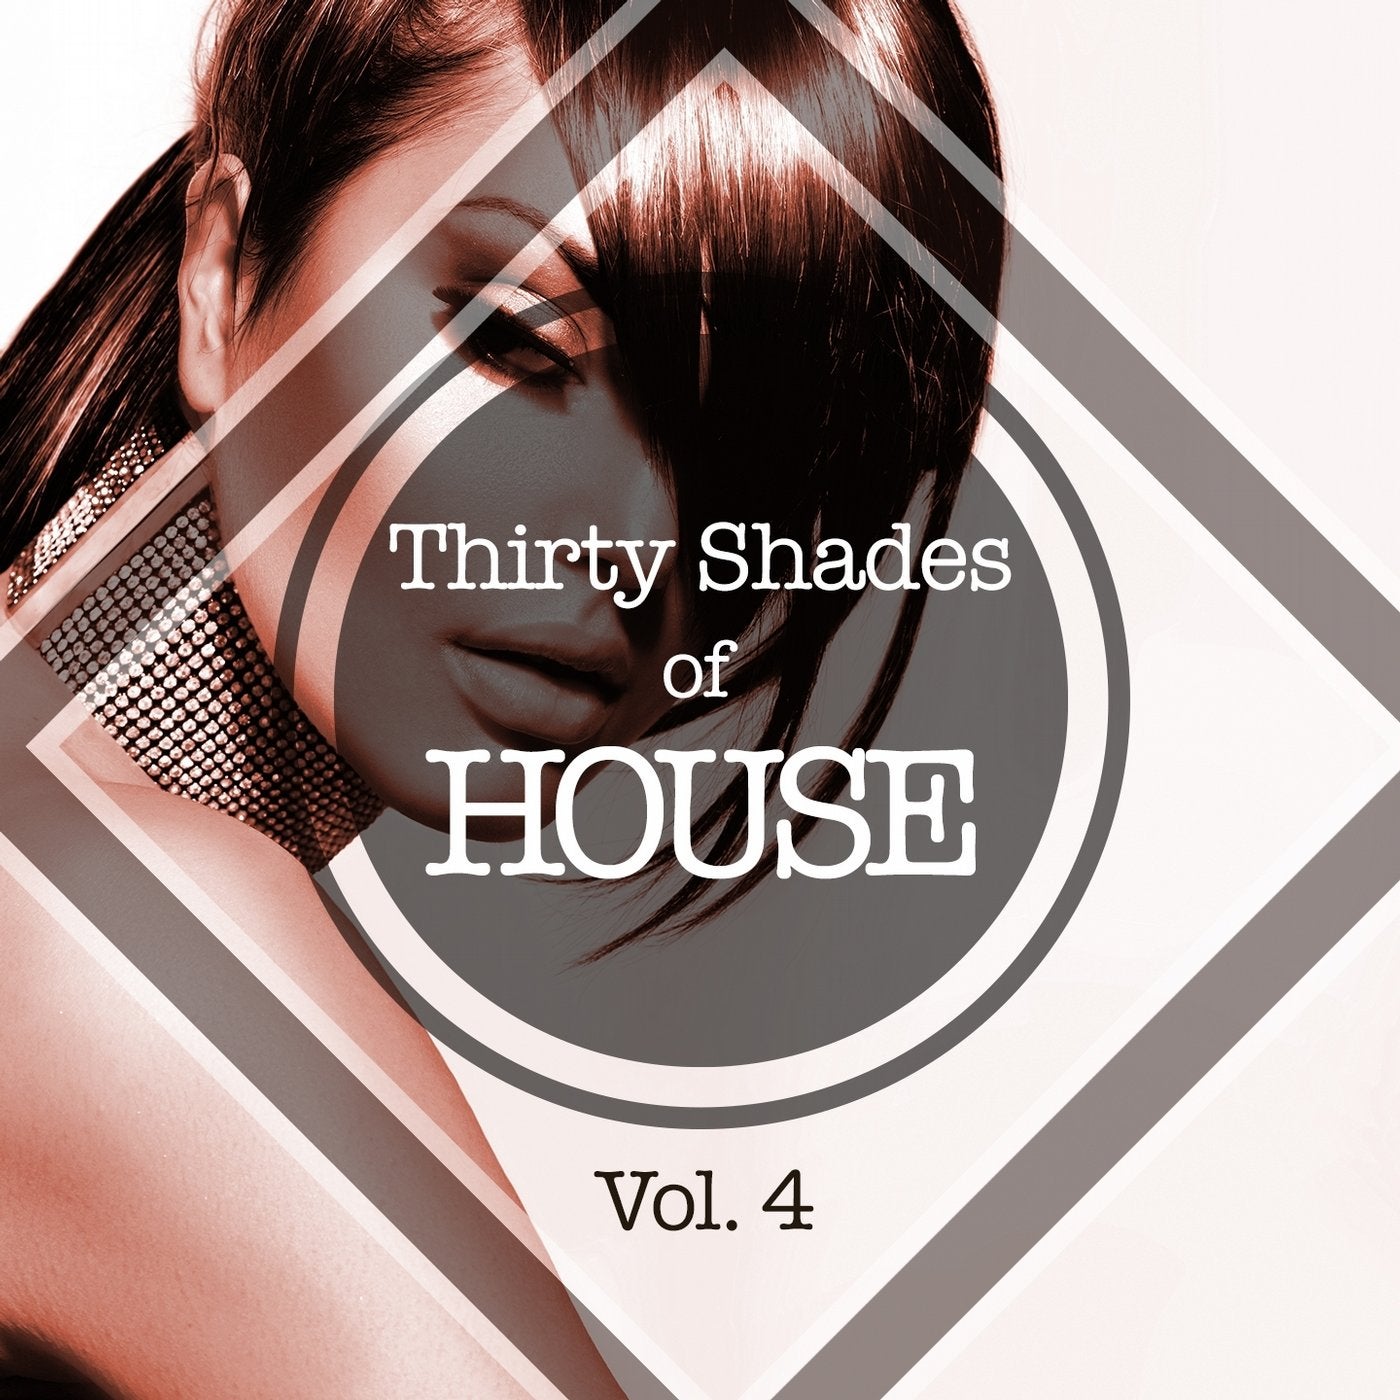 Thirty Shades of House, Vol. 4